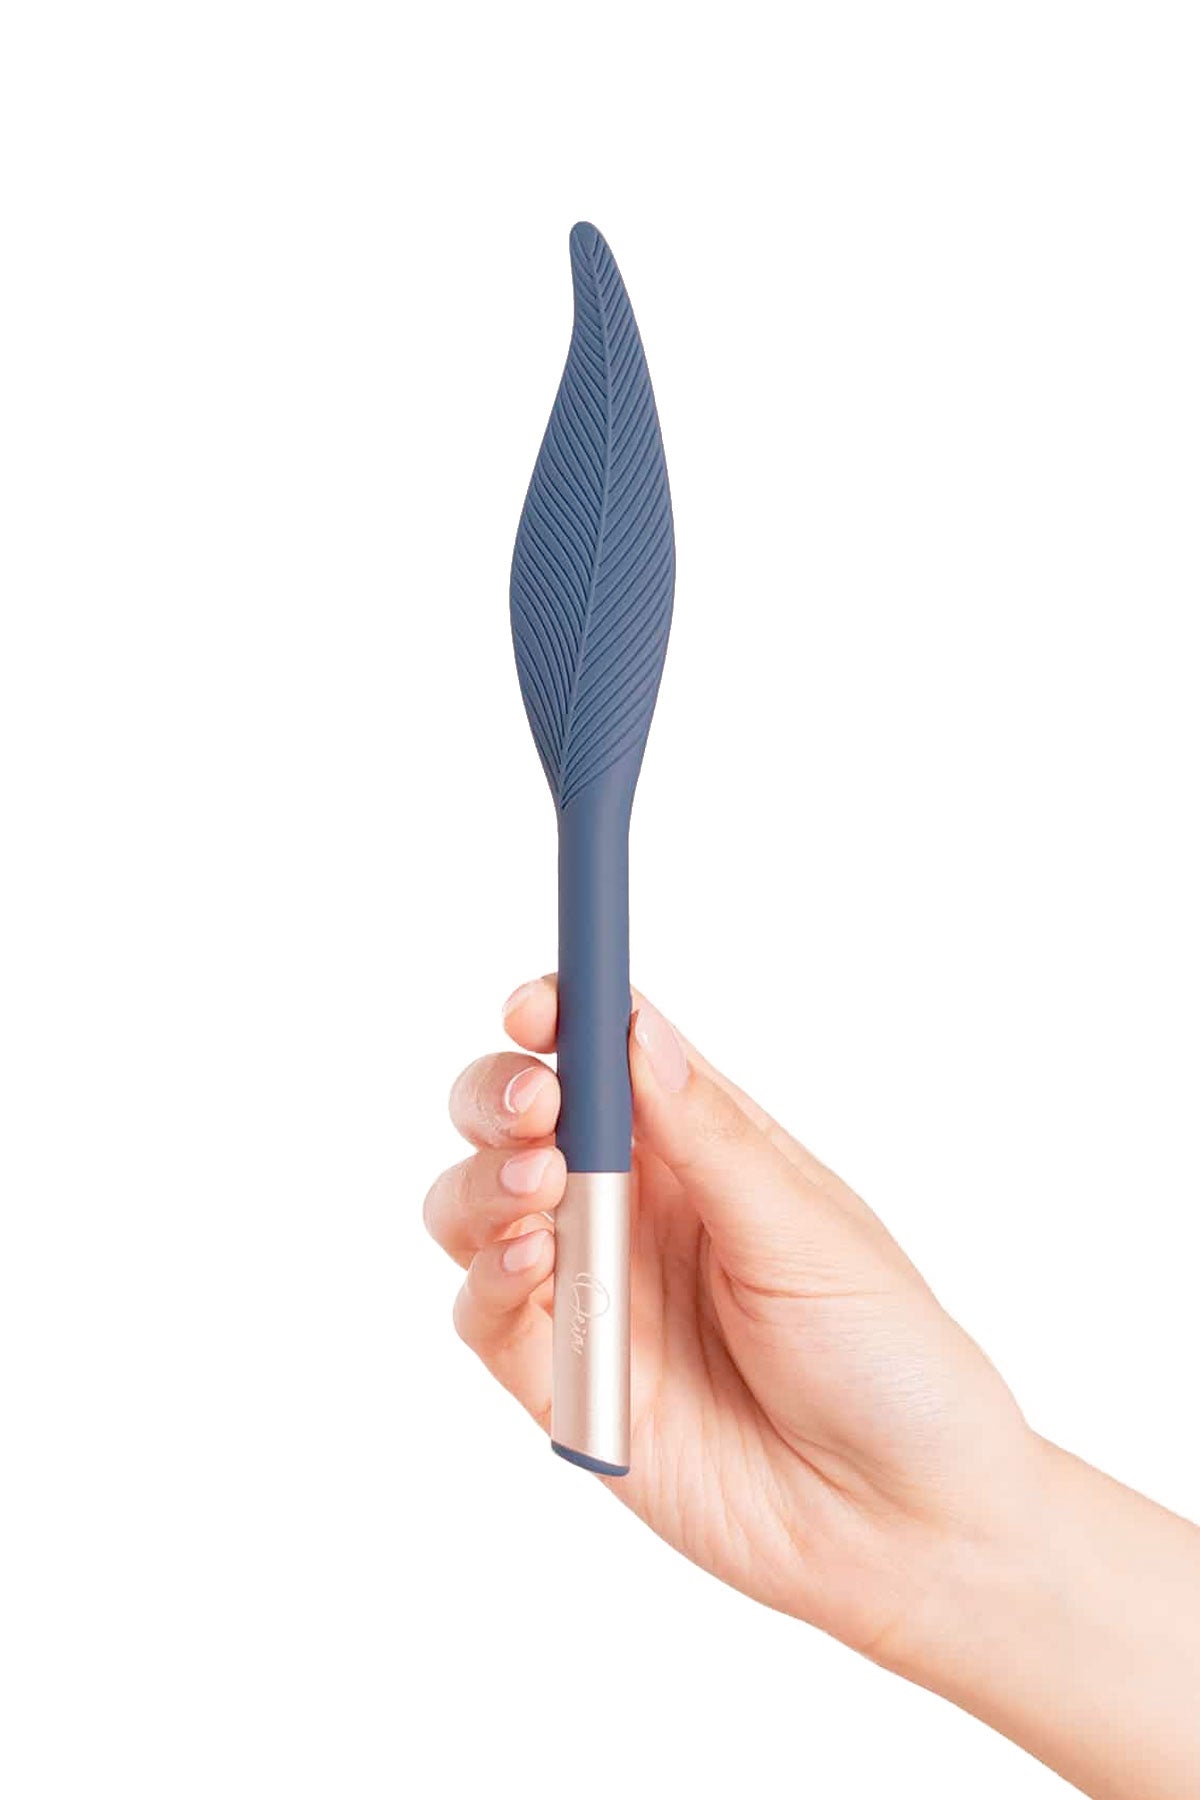 The Feather | Vibrating Tickler